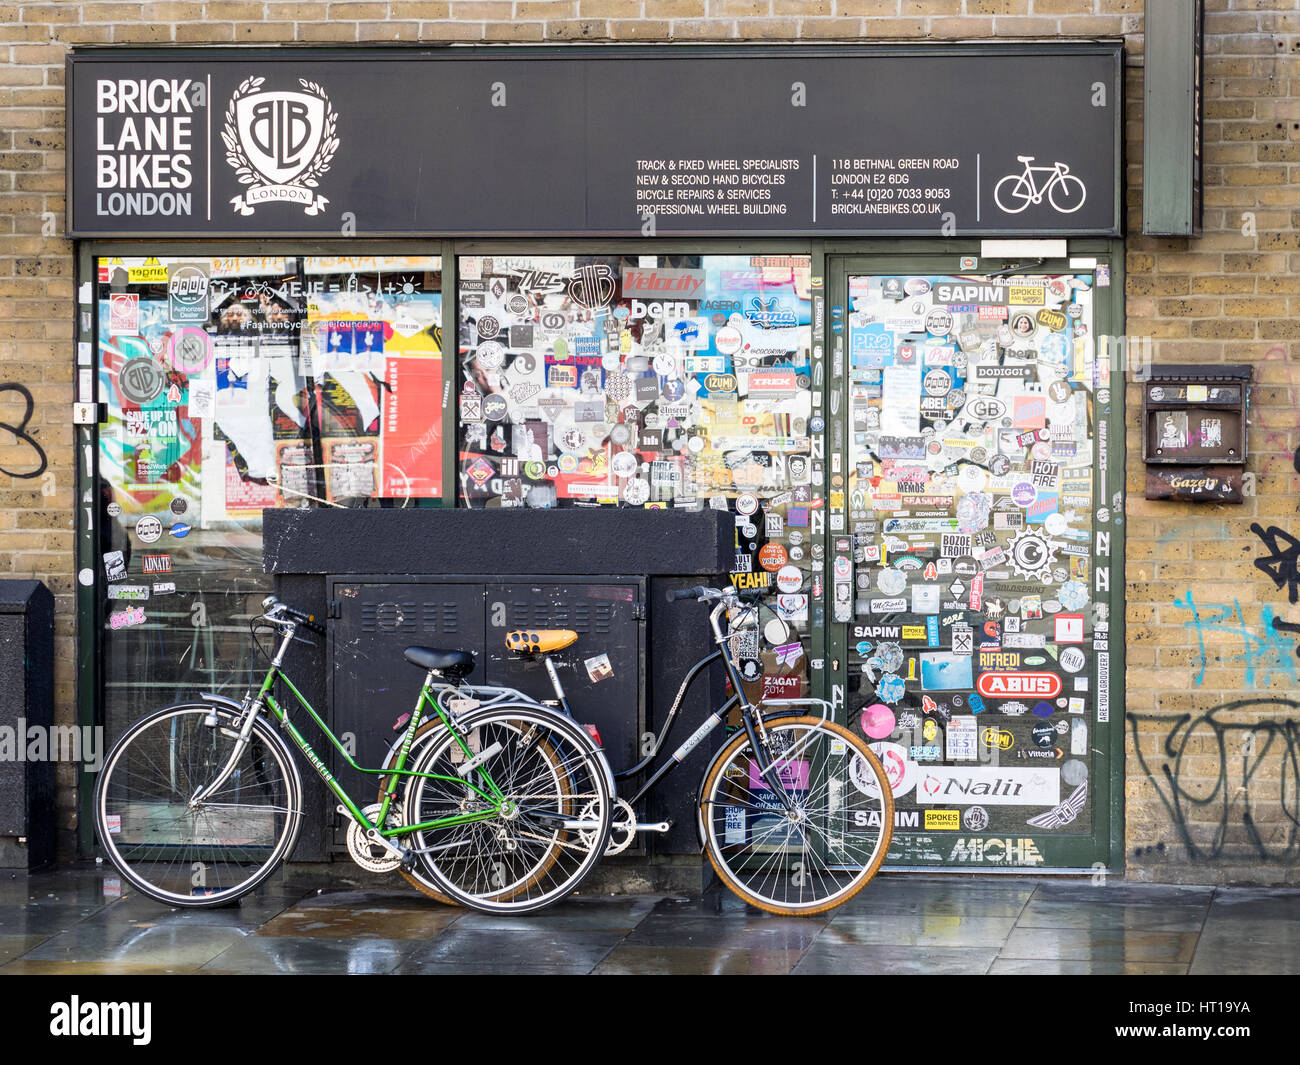 Brick Lane Bikes, set up by a former cycle courier in London's fasionable Shoreditch area. Well known for its focus on fixie and singlespeed bikes Stock Photo